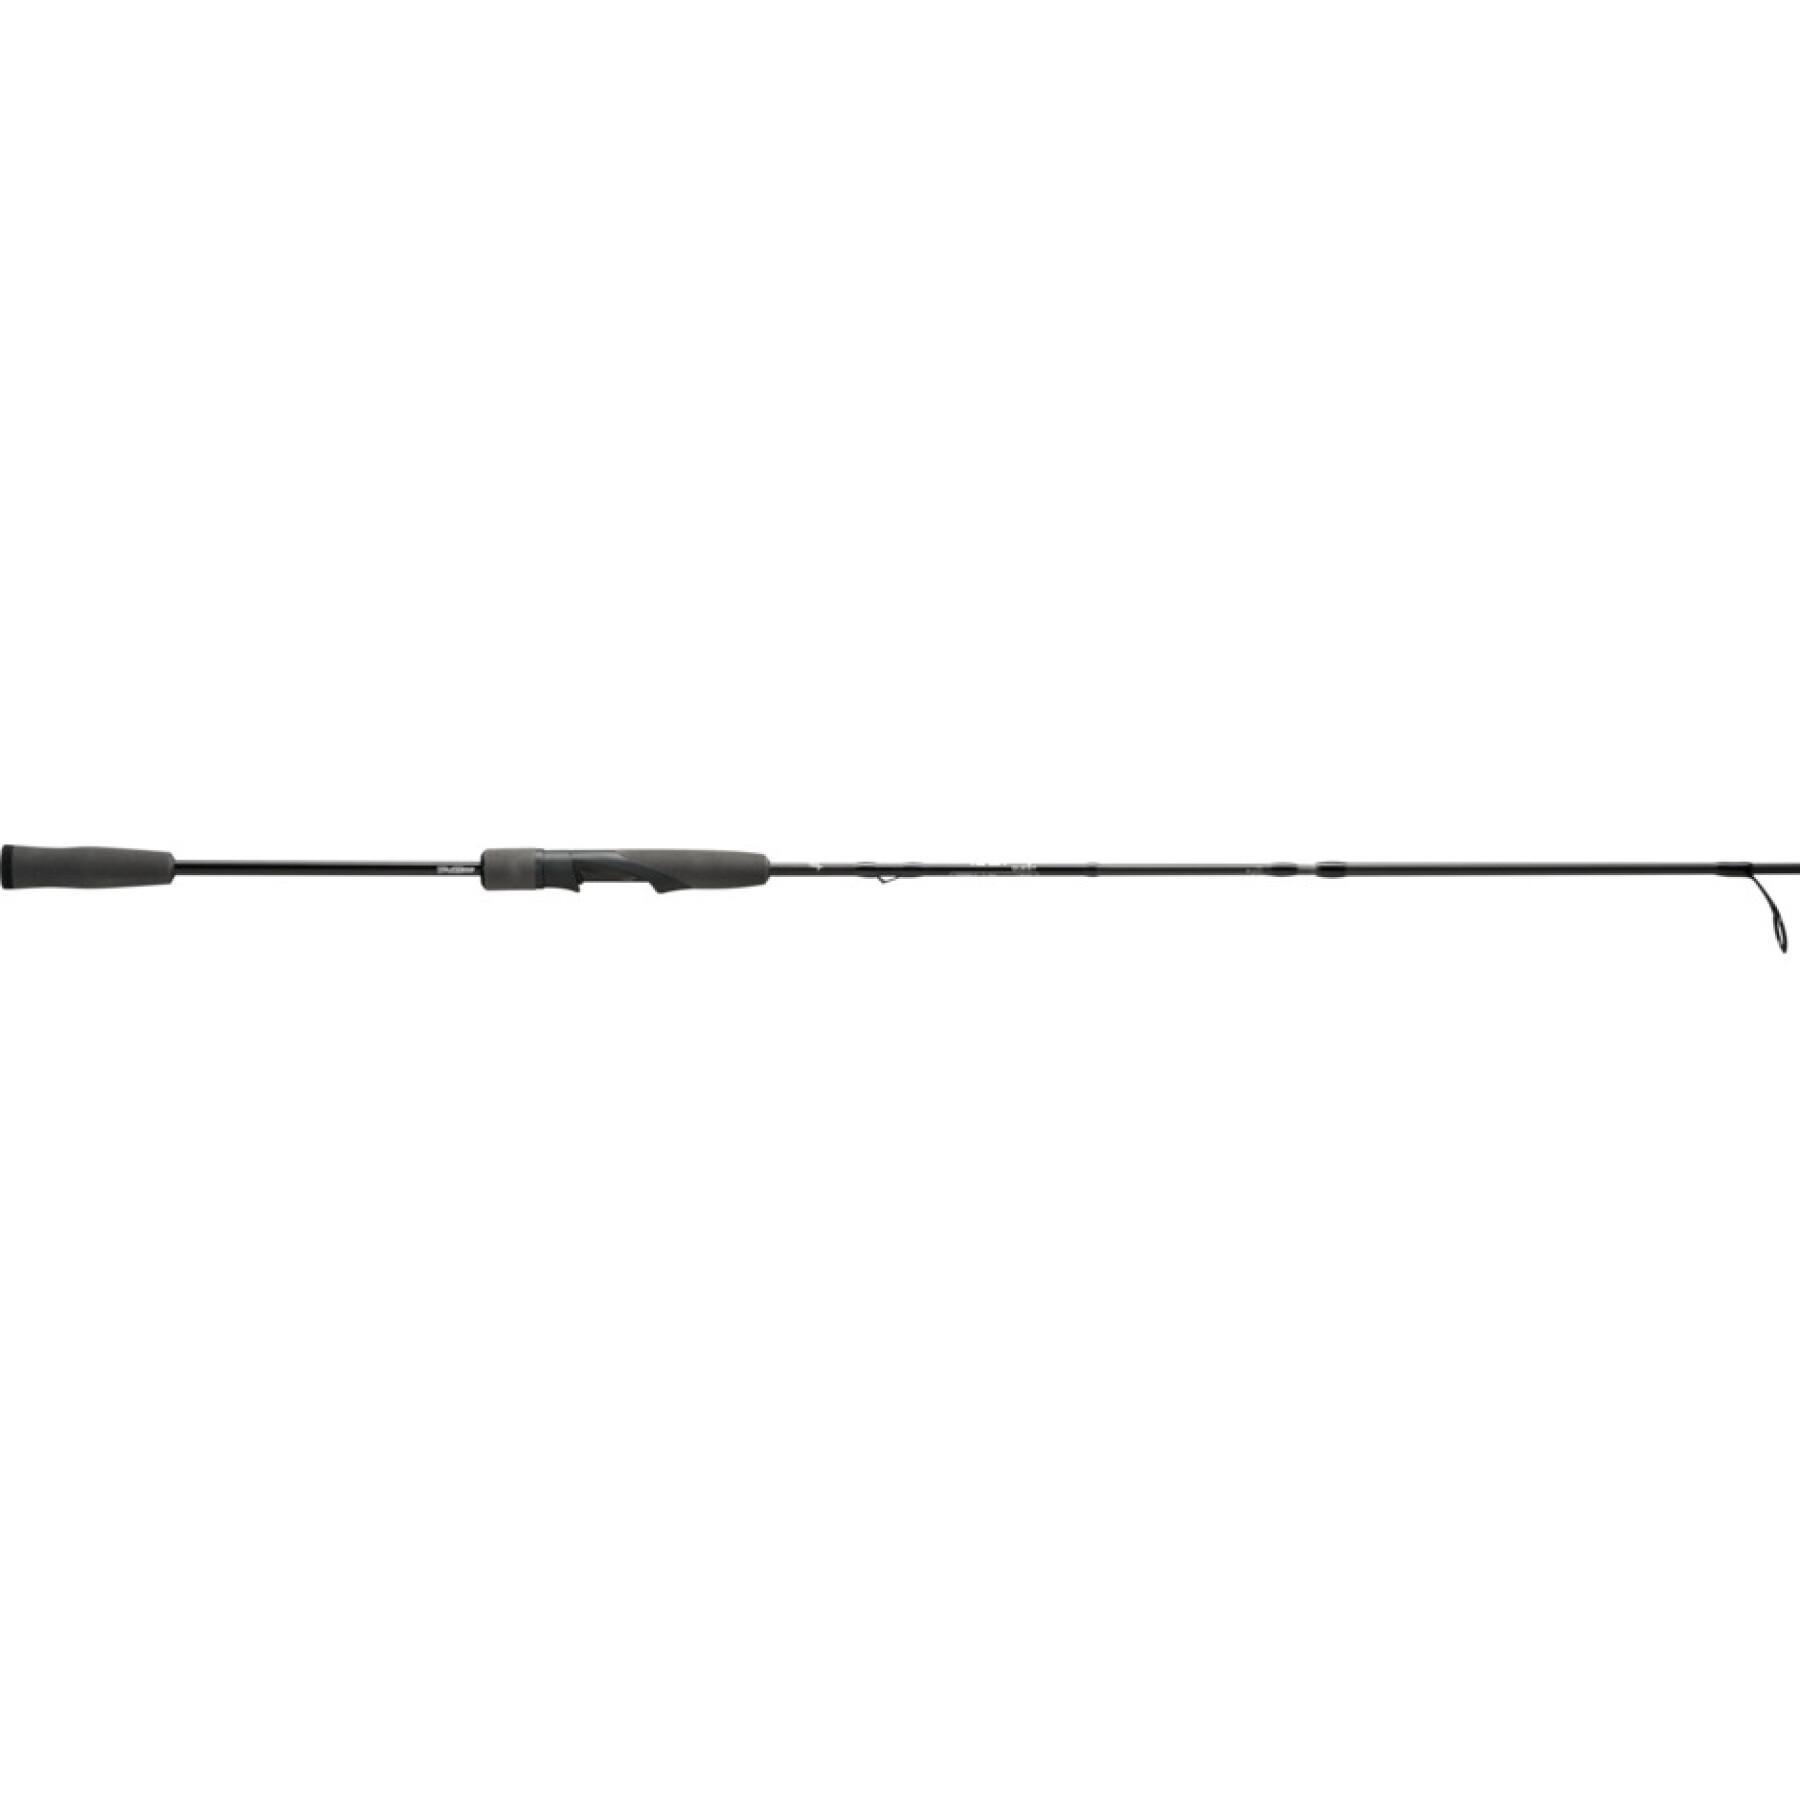 Spinstang 13 Fishing Defy Quest Trout 3-15g